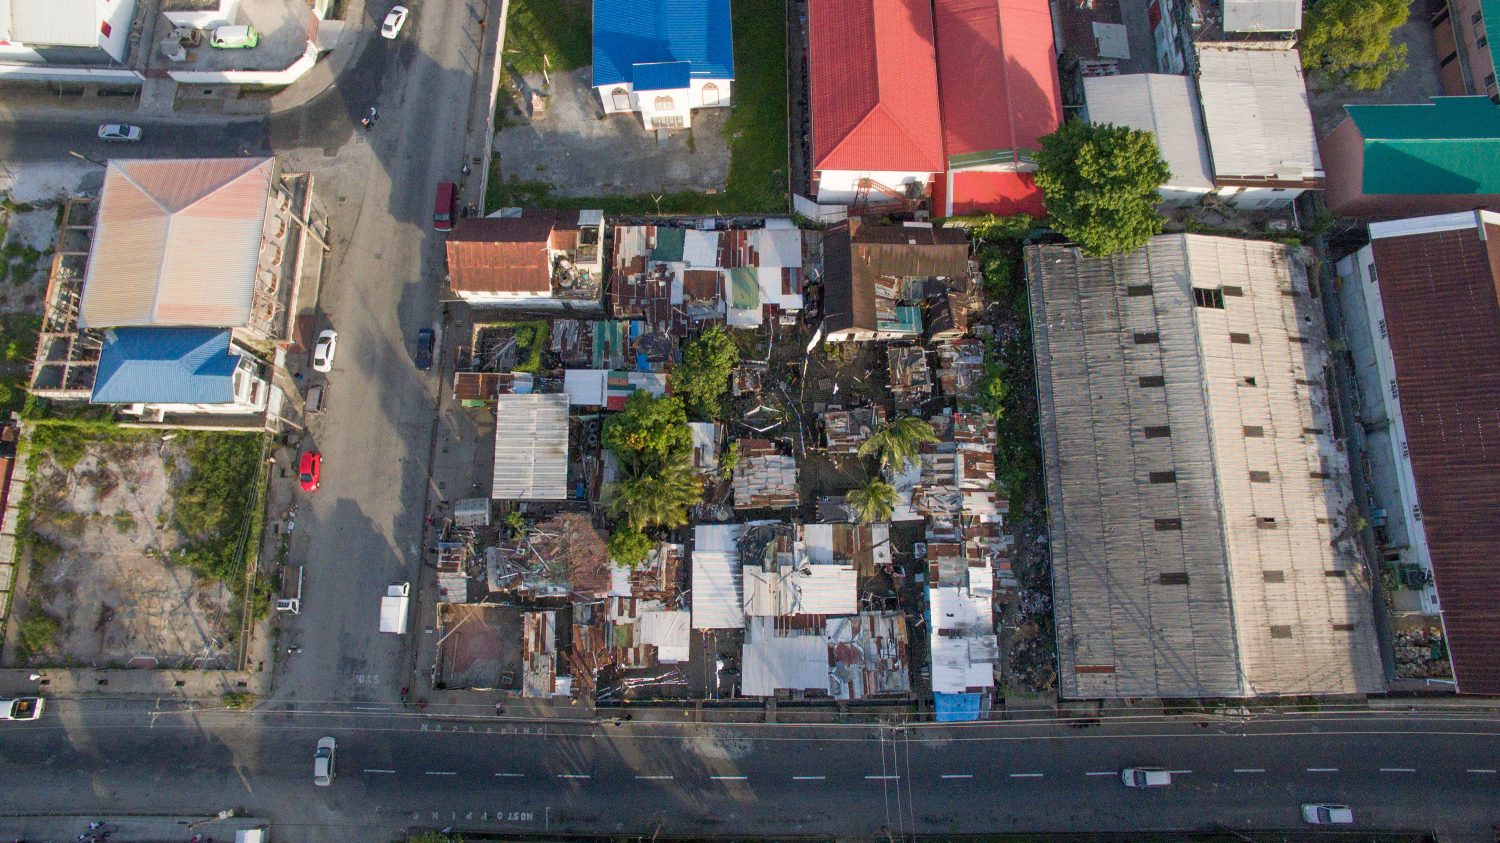 An aerial view of the community at Lombard and Broad streets